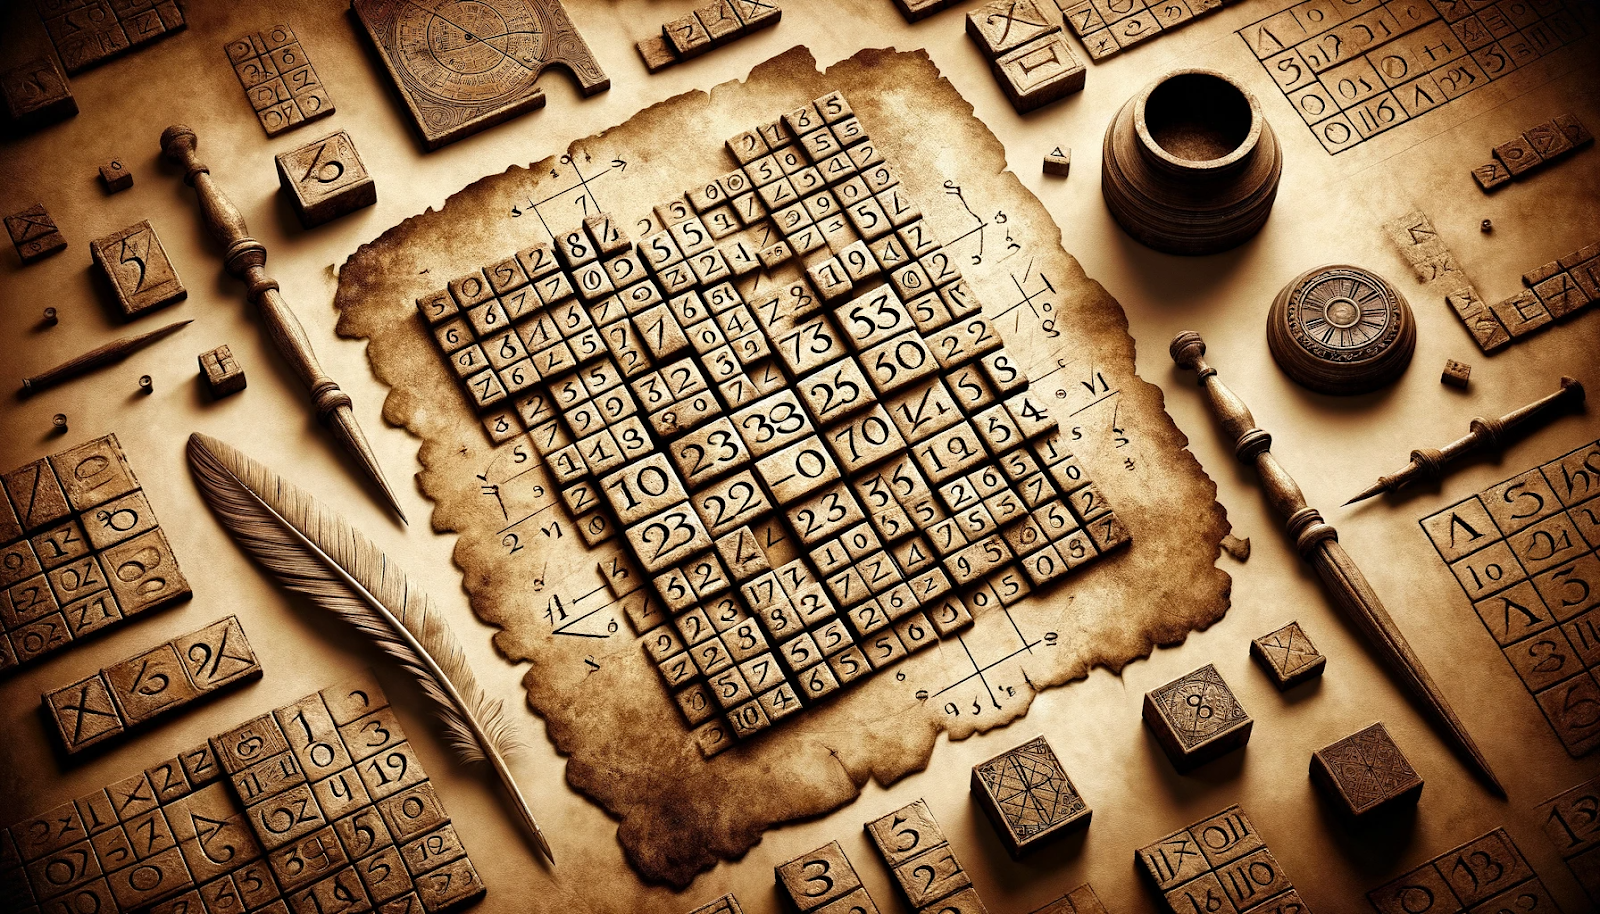 A sepia-toned image depicting an ancient number puzzle, reminiscent of early mathematical artifacts. The puzzle should appear on a worn, textured surf.